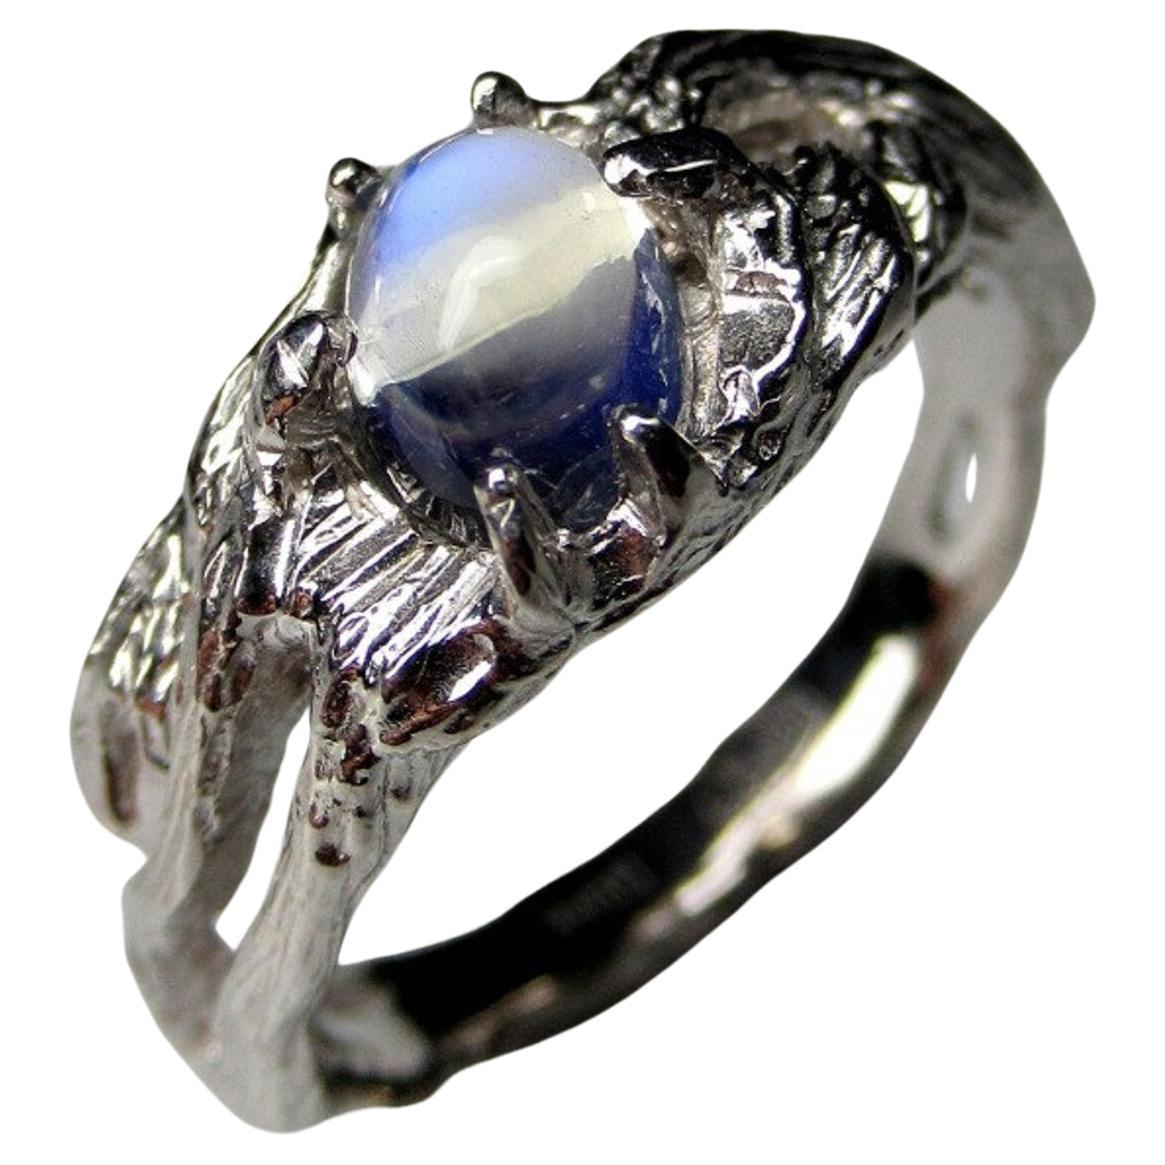 Adularia Moonstone Silver Ring Cabochon fine quality wedding anniversary gift